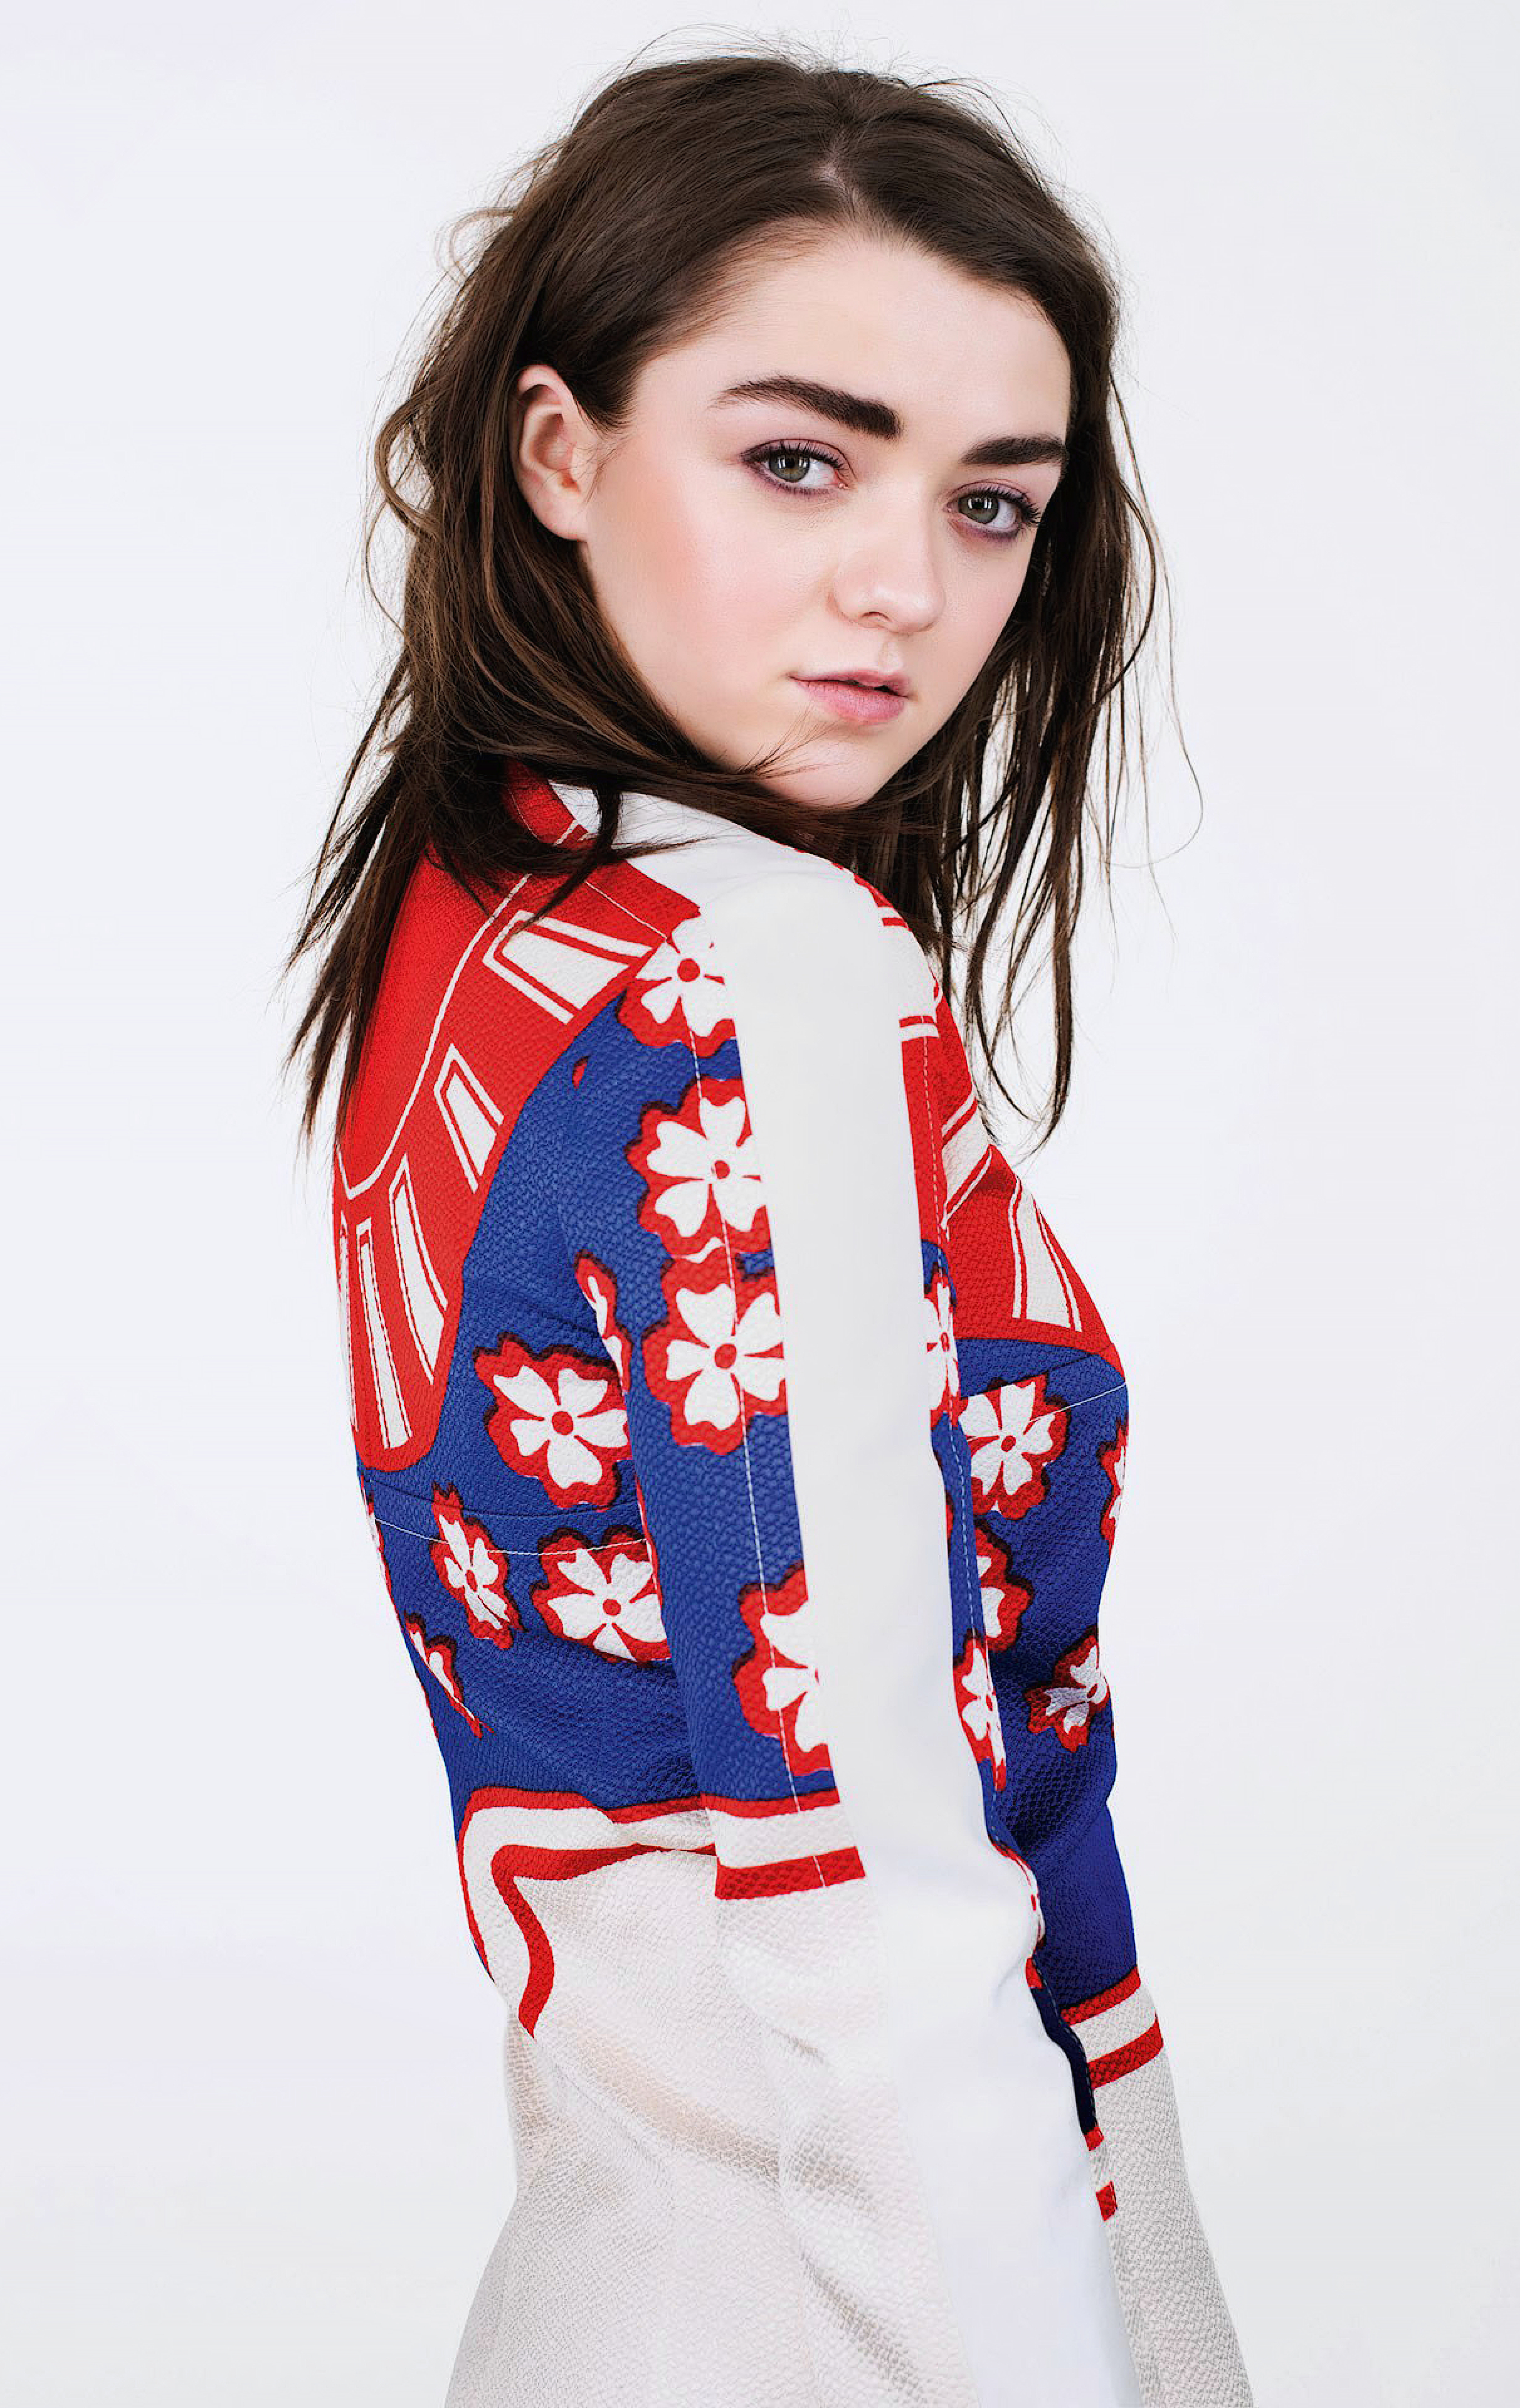 4620x7320 British Actress Maisie Williams 4620x7320 Resolution Wallpaper,  HD Celebrities 4K Wallpapers, Images, Photos and Background - Wallpapers Den